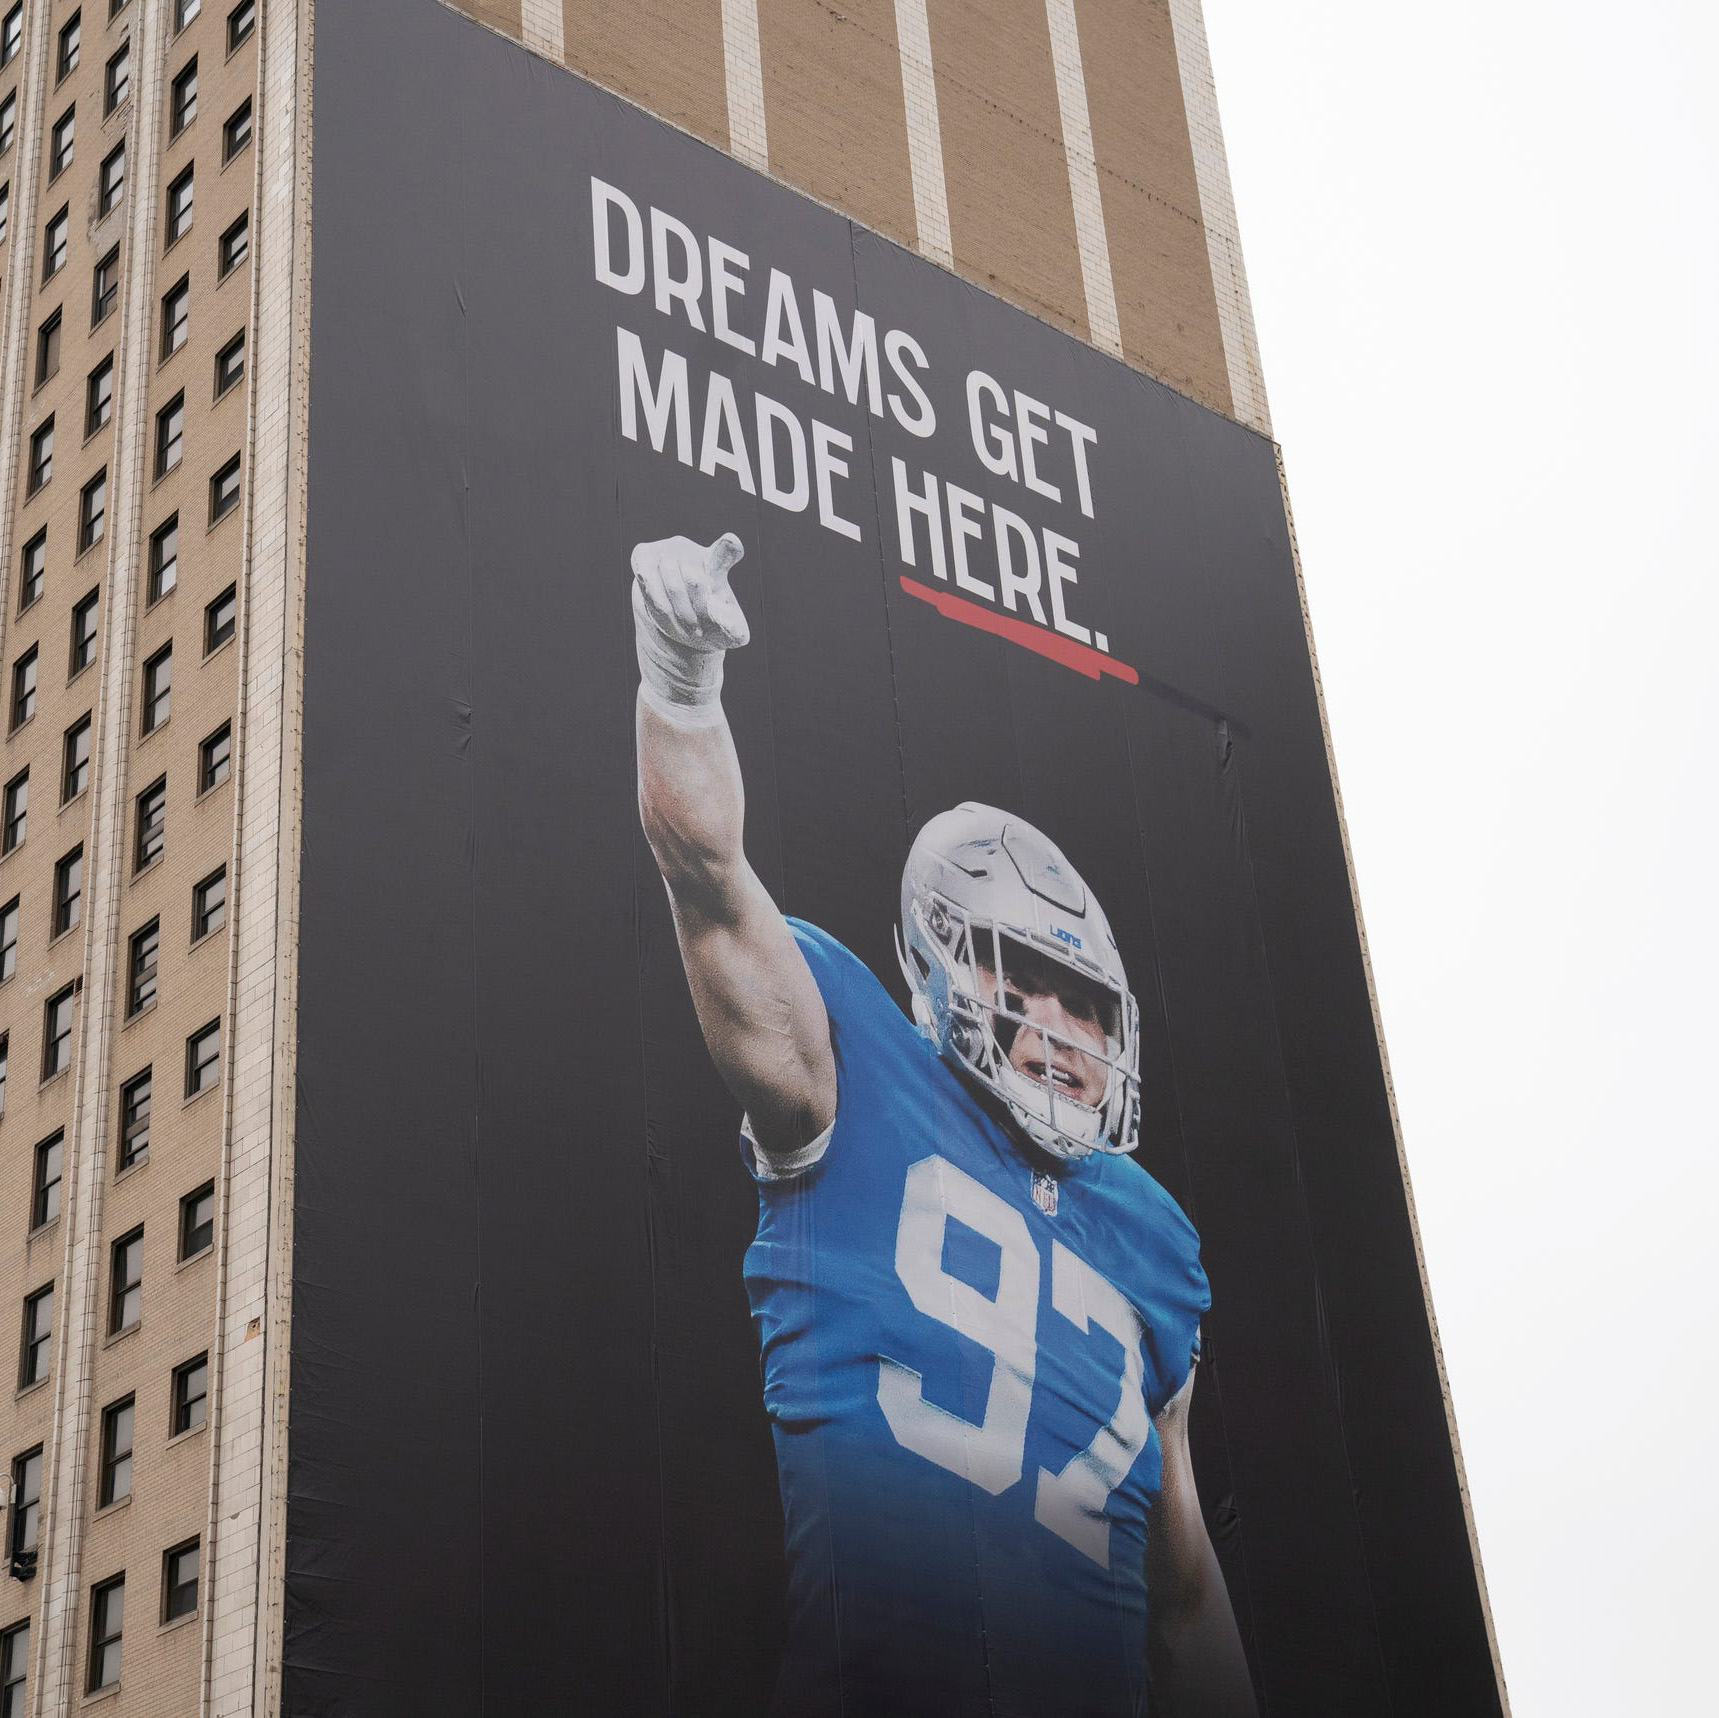 After years of planning , the NFL Draft has finally arrived in Detroit. And the city has rolled out the red carpet to the world